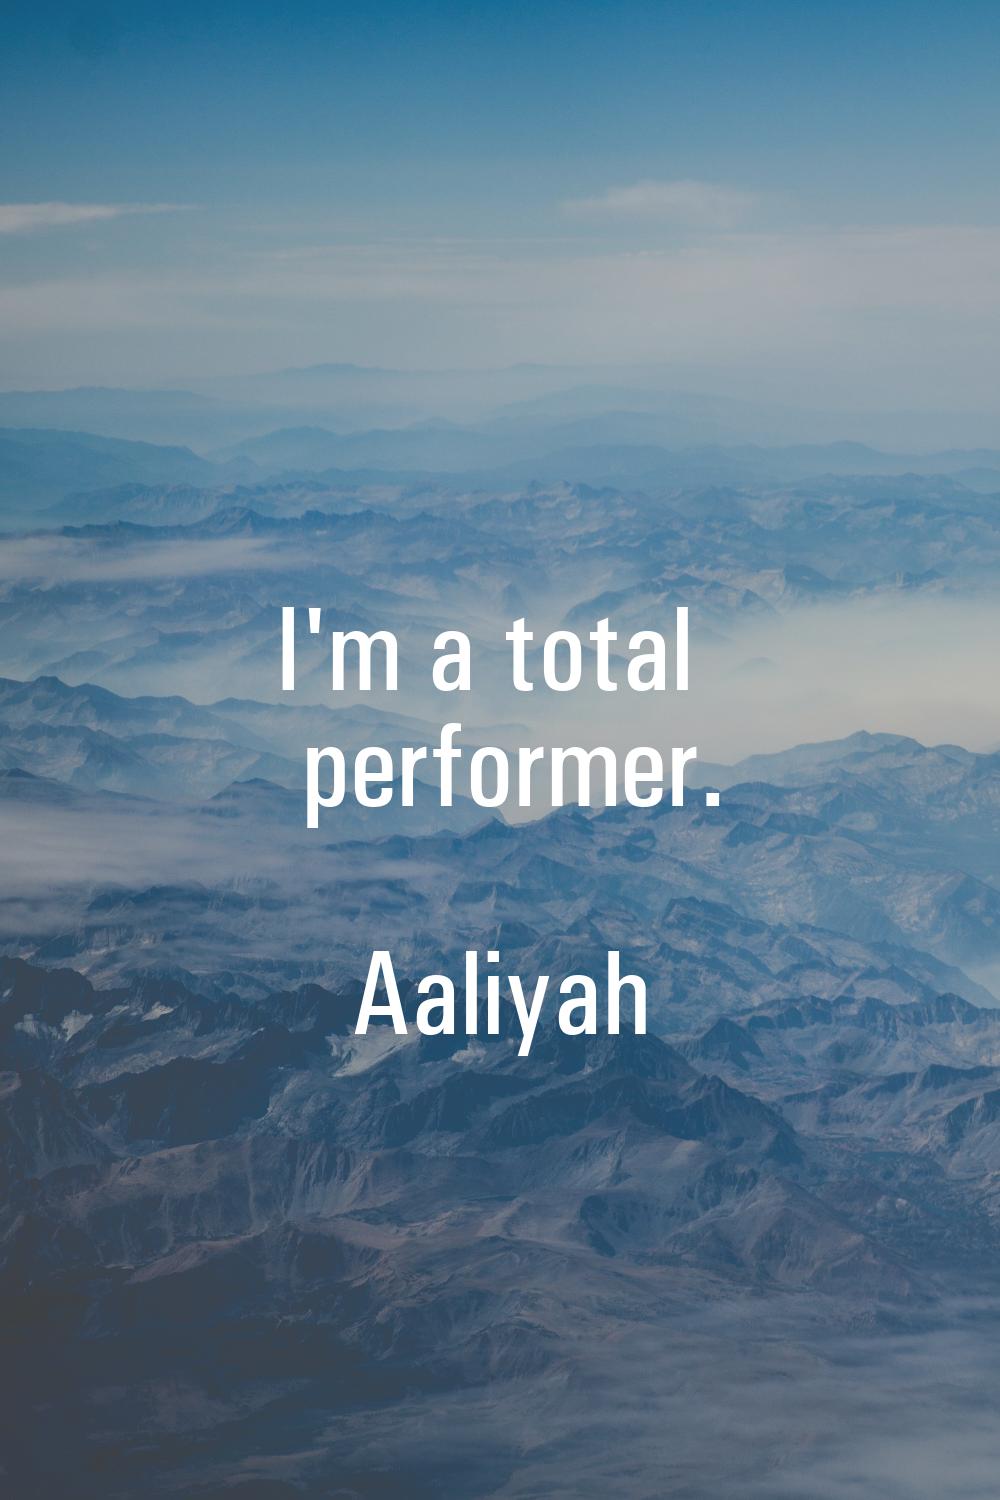 I'm a total performer.